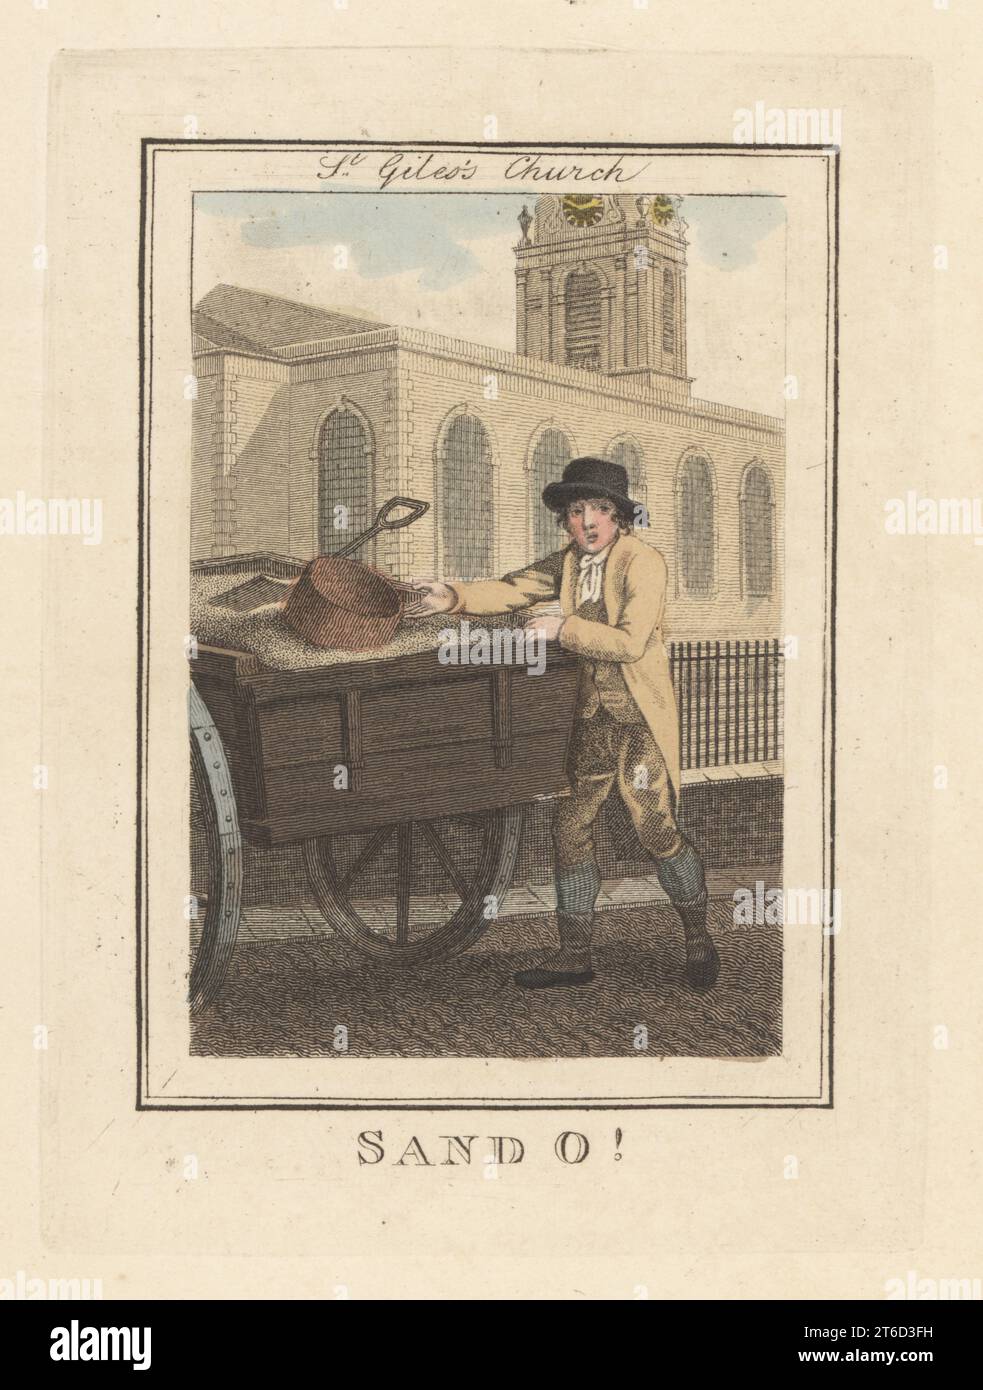 Sand seller in front of St Giles Church. In hat, coat, waistcoat, breeches and boots, with wagon of sand, basket and spade. Red sand and white sand was used in cleaning kitchen utensils and floors. Handcoloured copperplate engraving by Edward Edwards after an illustration by William Marshall Craig from Description of the Plates Representing the Itinerant Traders of London, Richard Phillips, No. 71 St Pauls Churchyard, London, 1805. Stock Photo